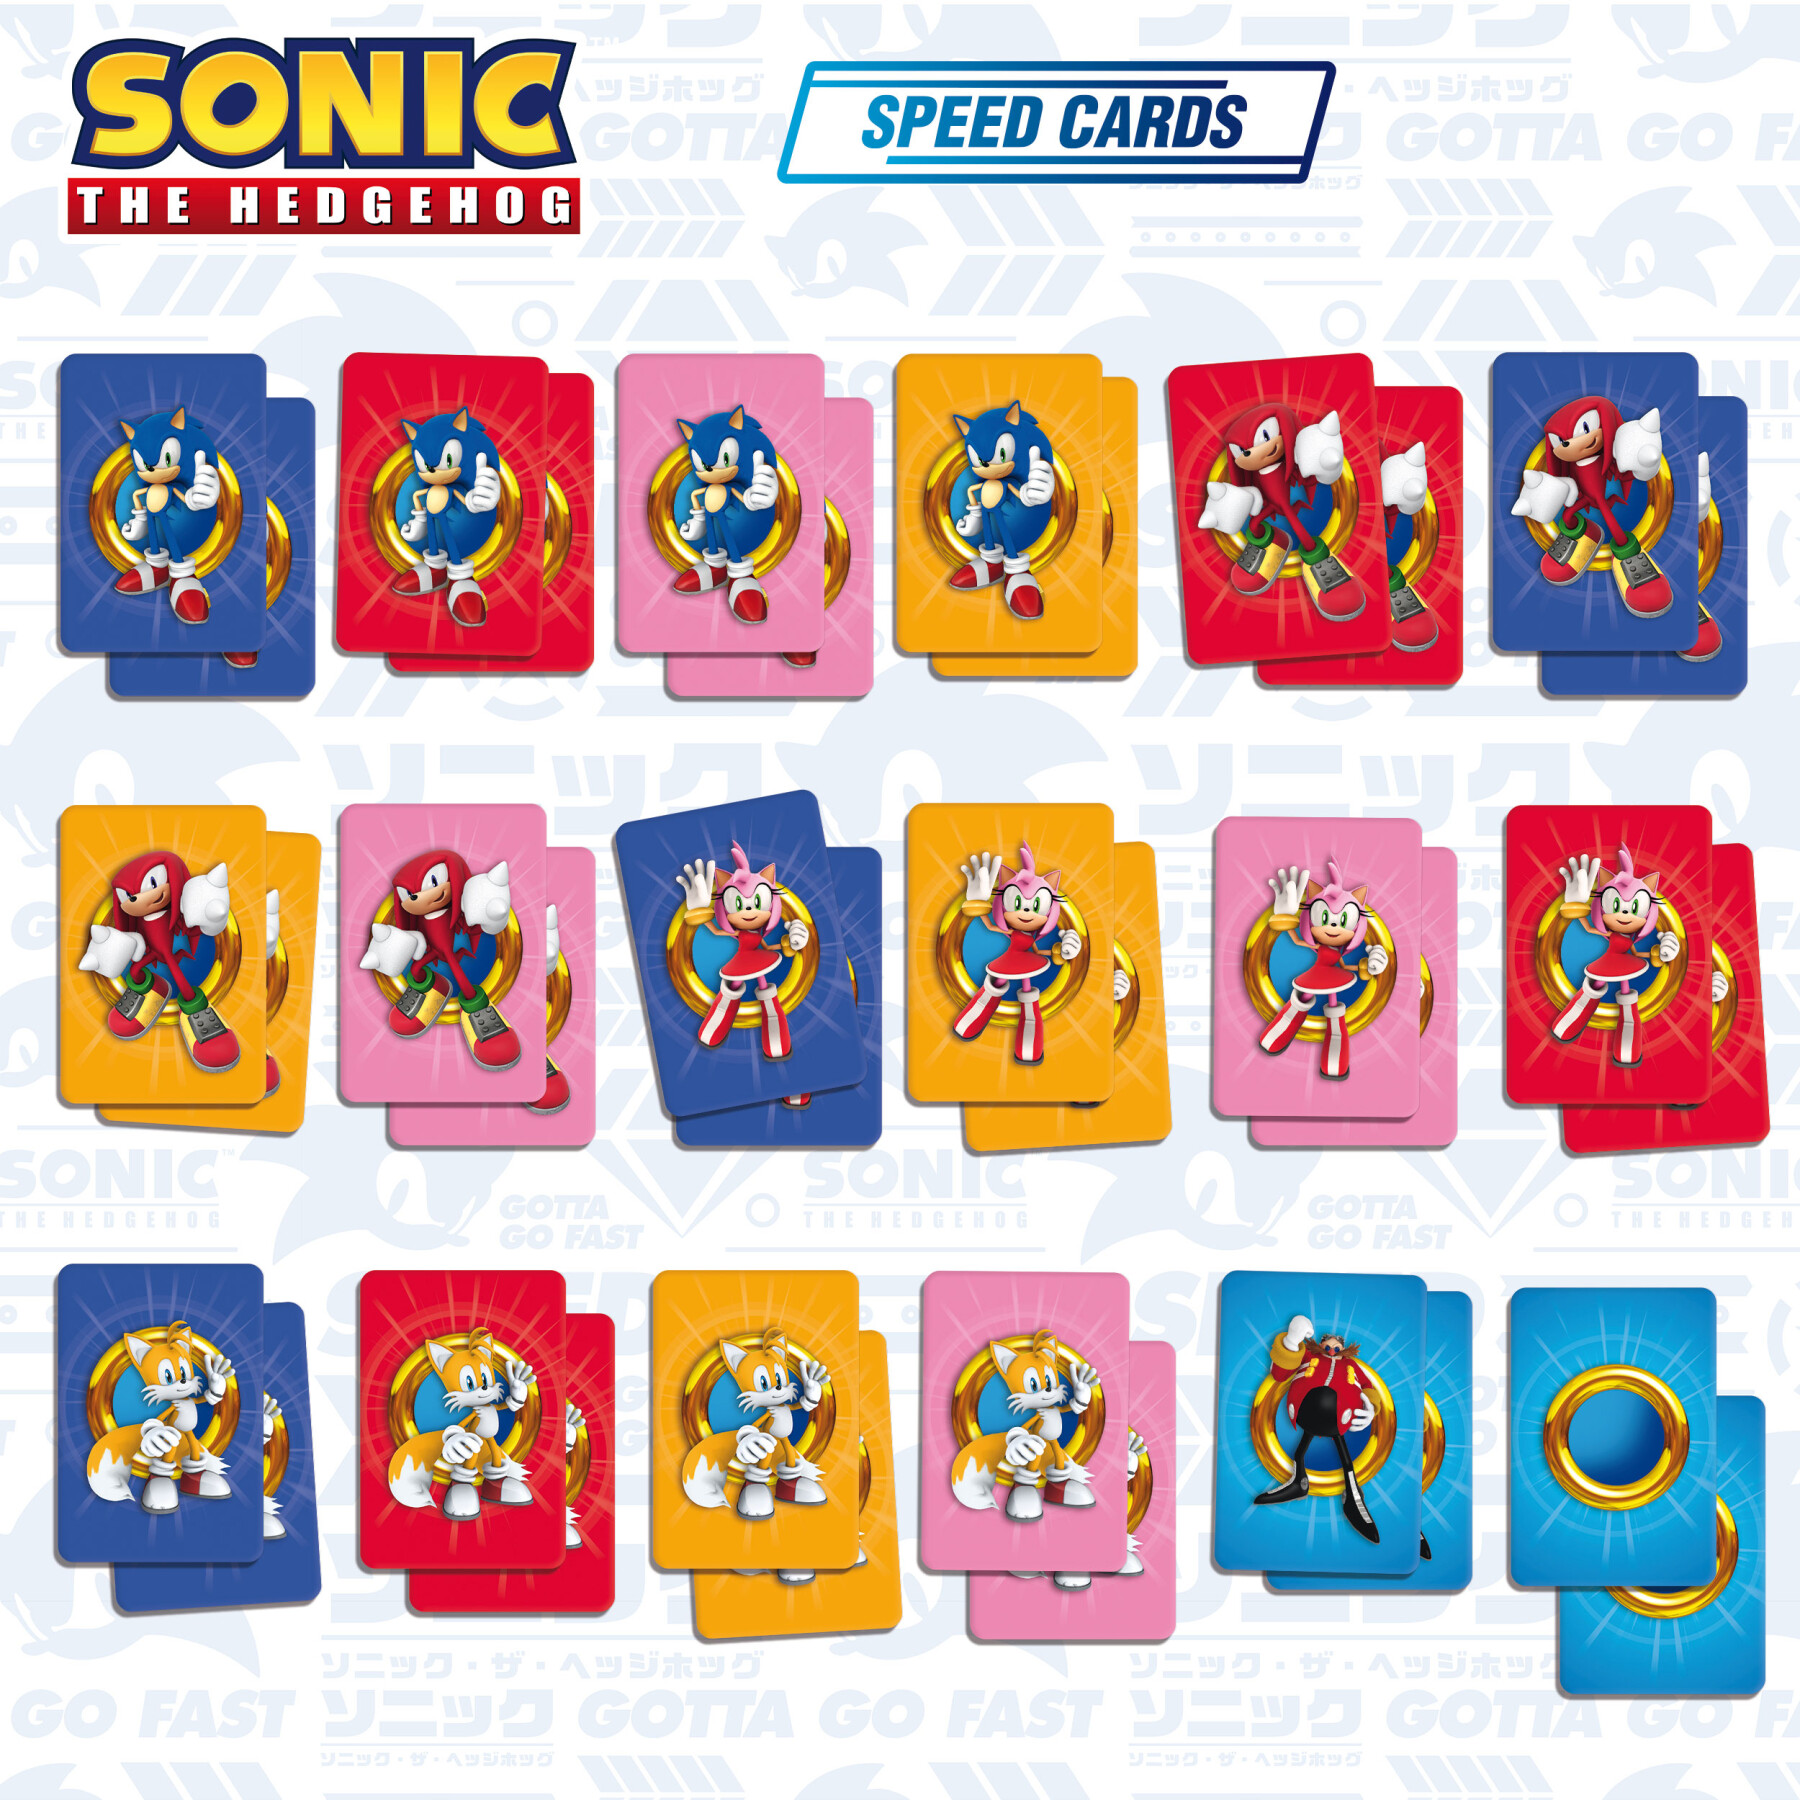 Sonic cards games - LISCIANI, Sonic